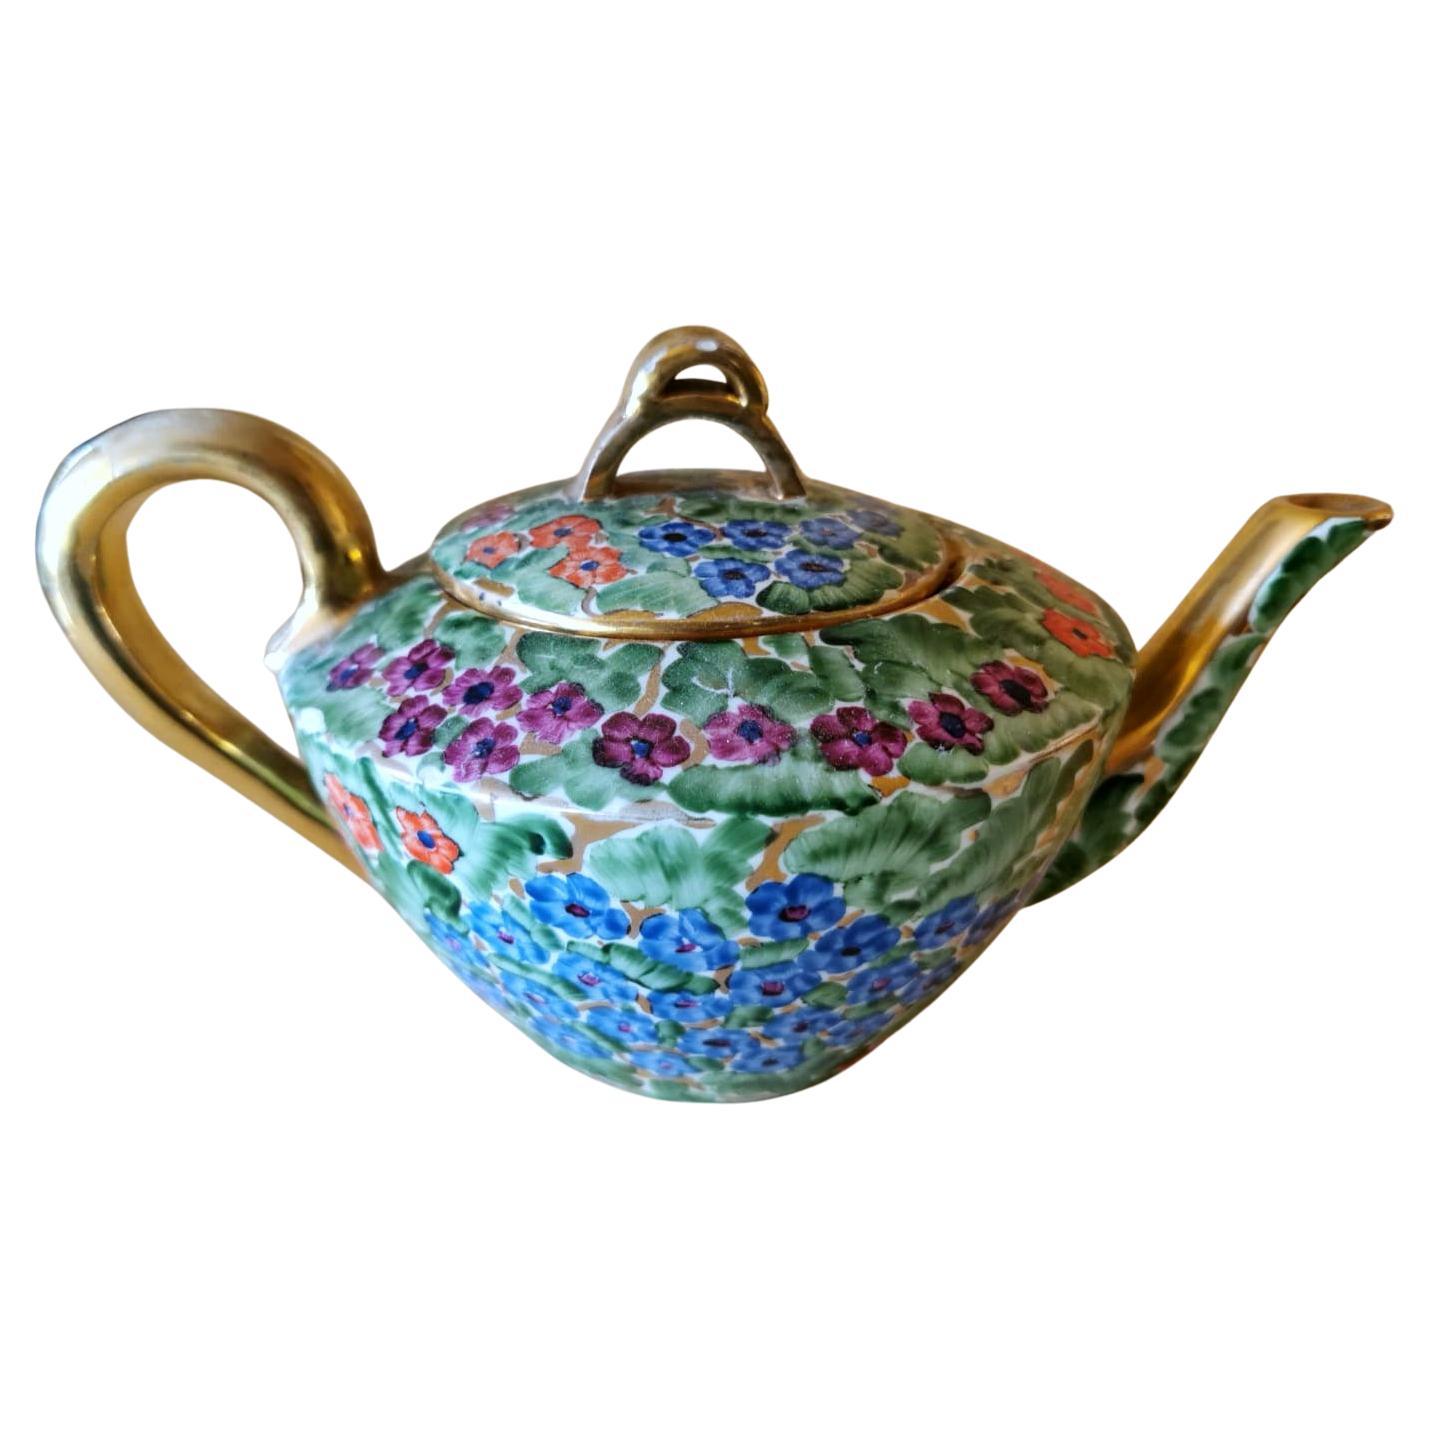 Arts and Crafts Italian Hand Painted Glazed Ceramic Teapot